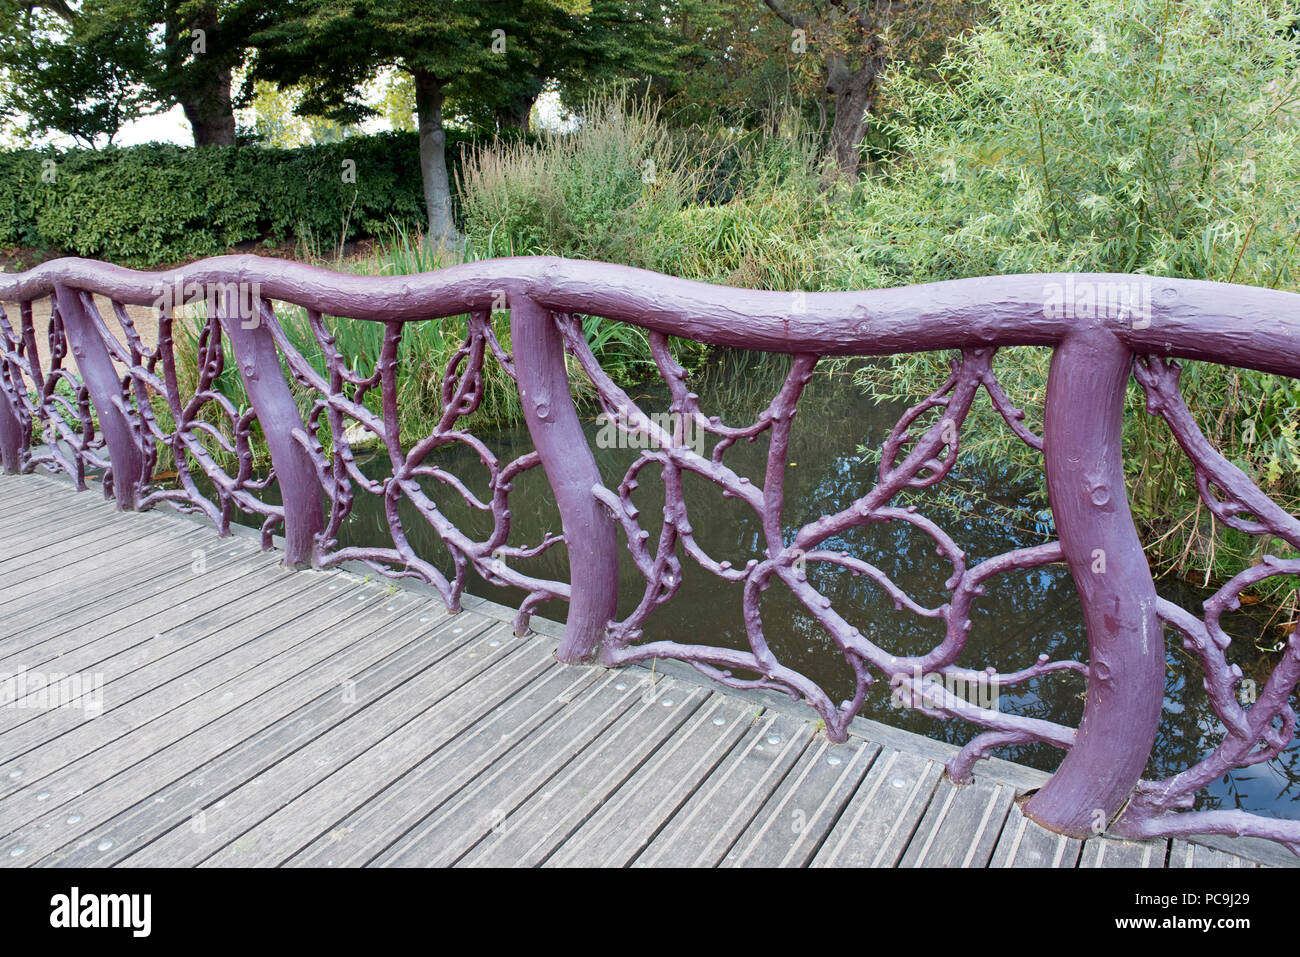 Bridge Parapet made out of tree branches, Bishops Park Fulham London England Britain UK Stock Photo